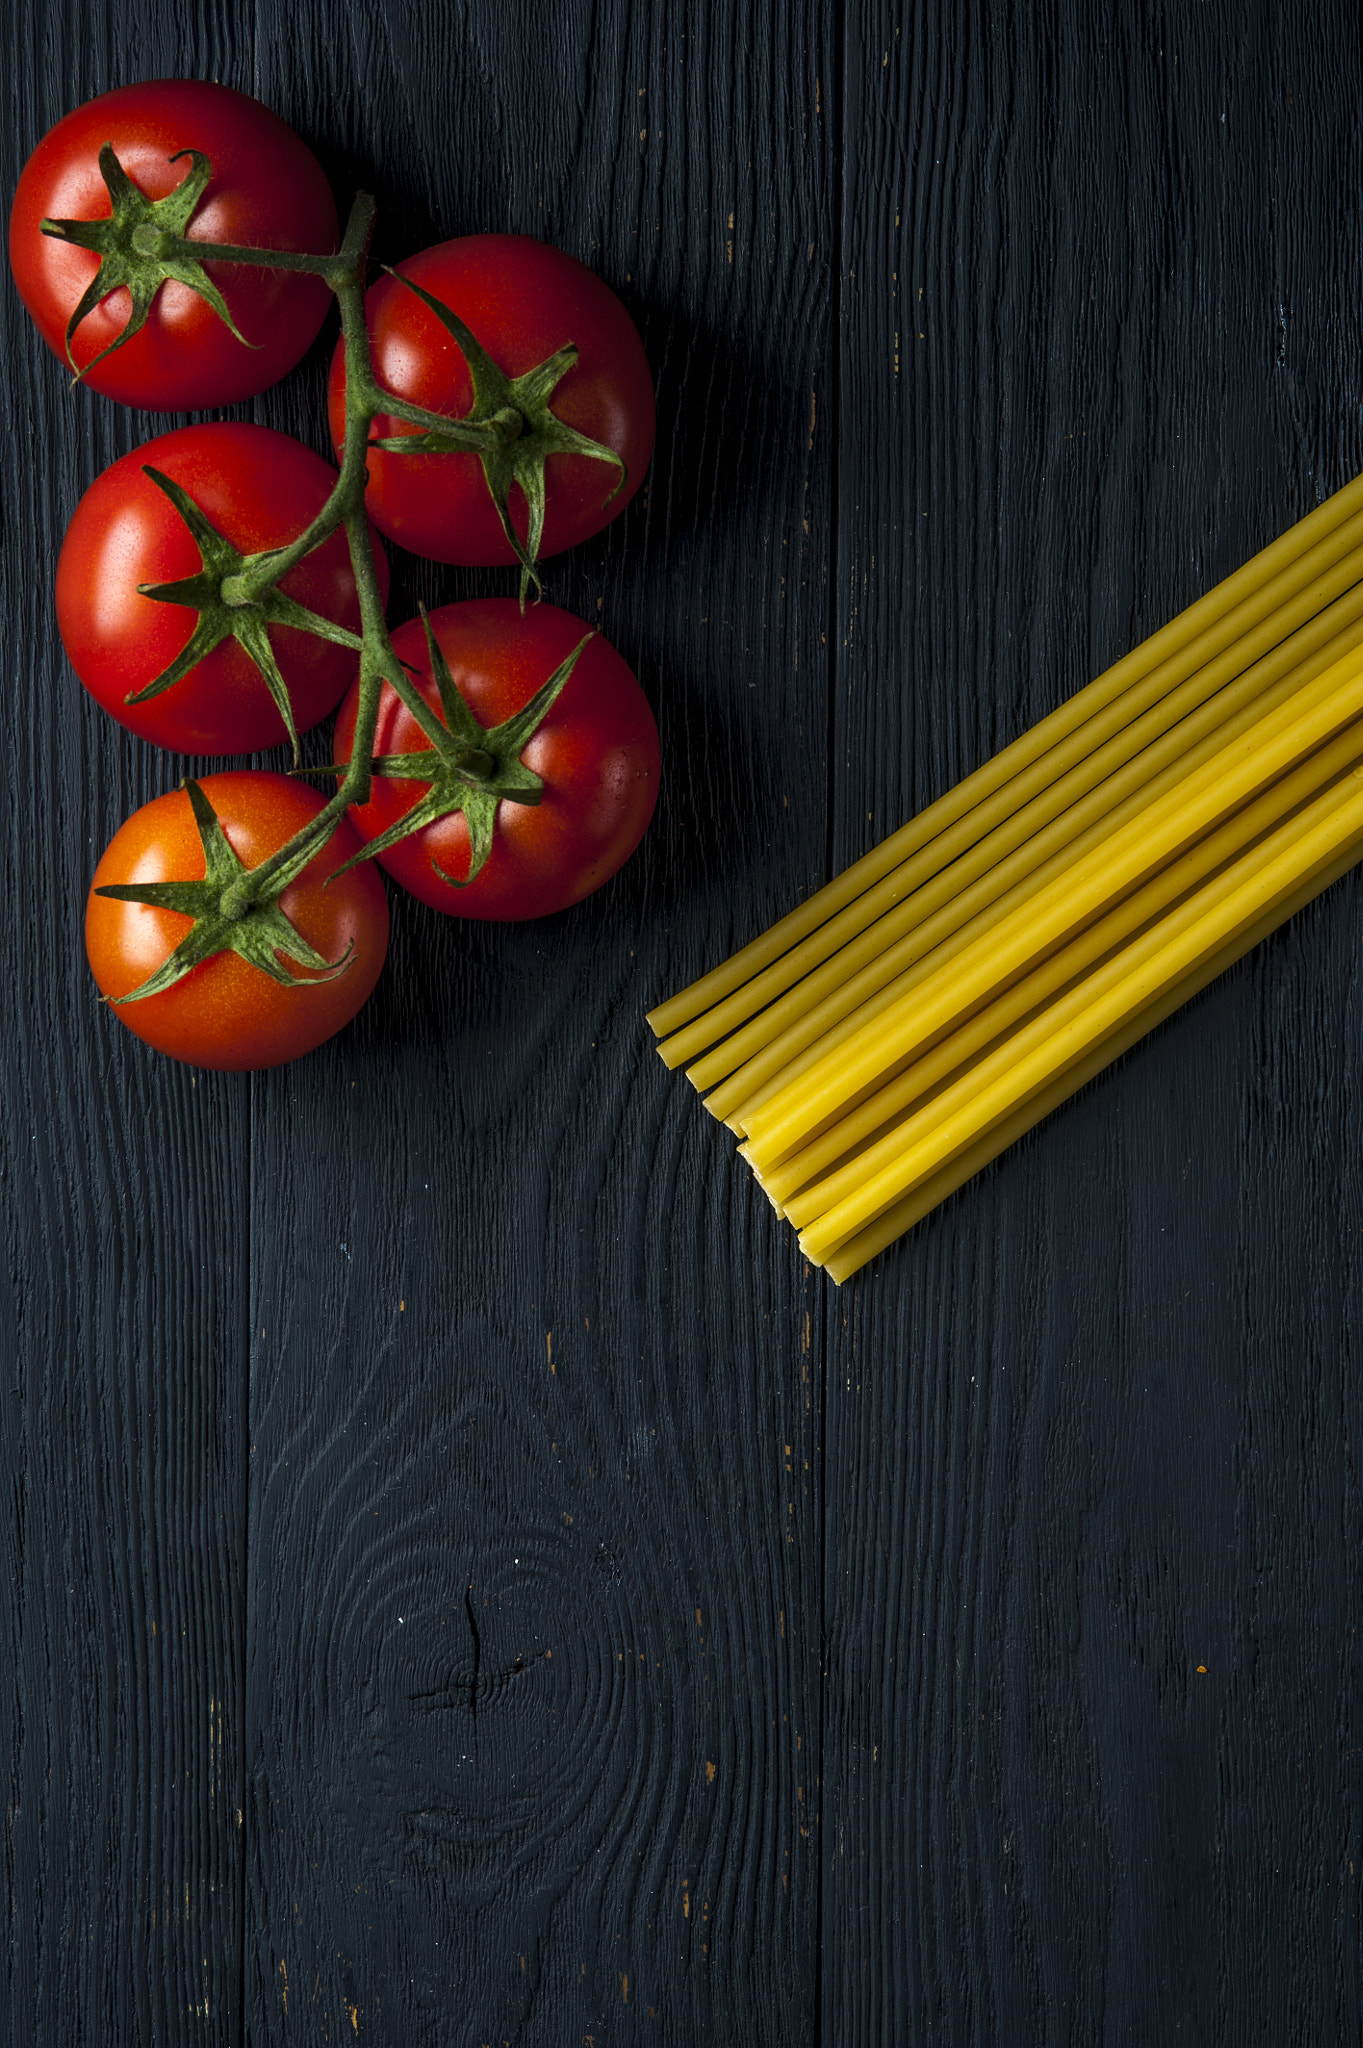 Nikon D700 + AF Micro-Nikkor 105mm f/2.8 sample photo. Bundle of uncooked pasta and tomatoes photography